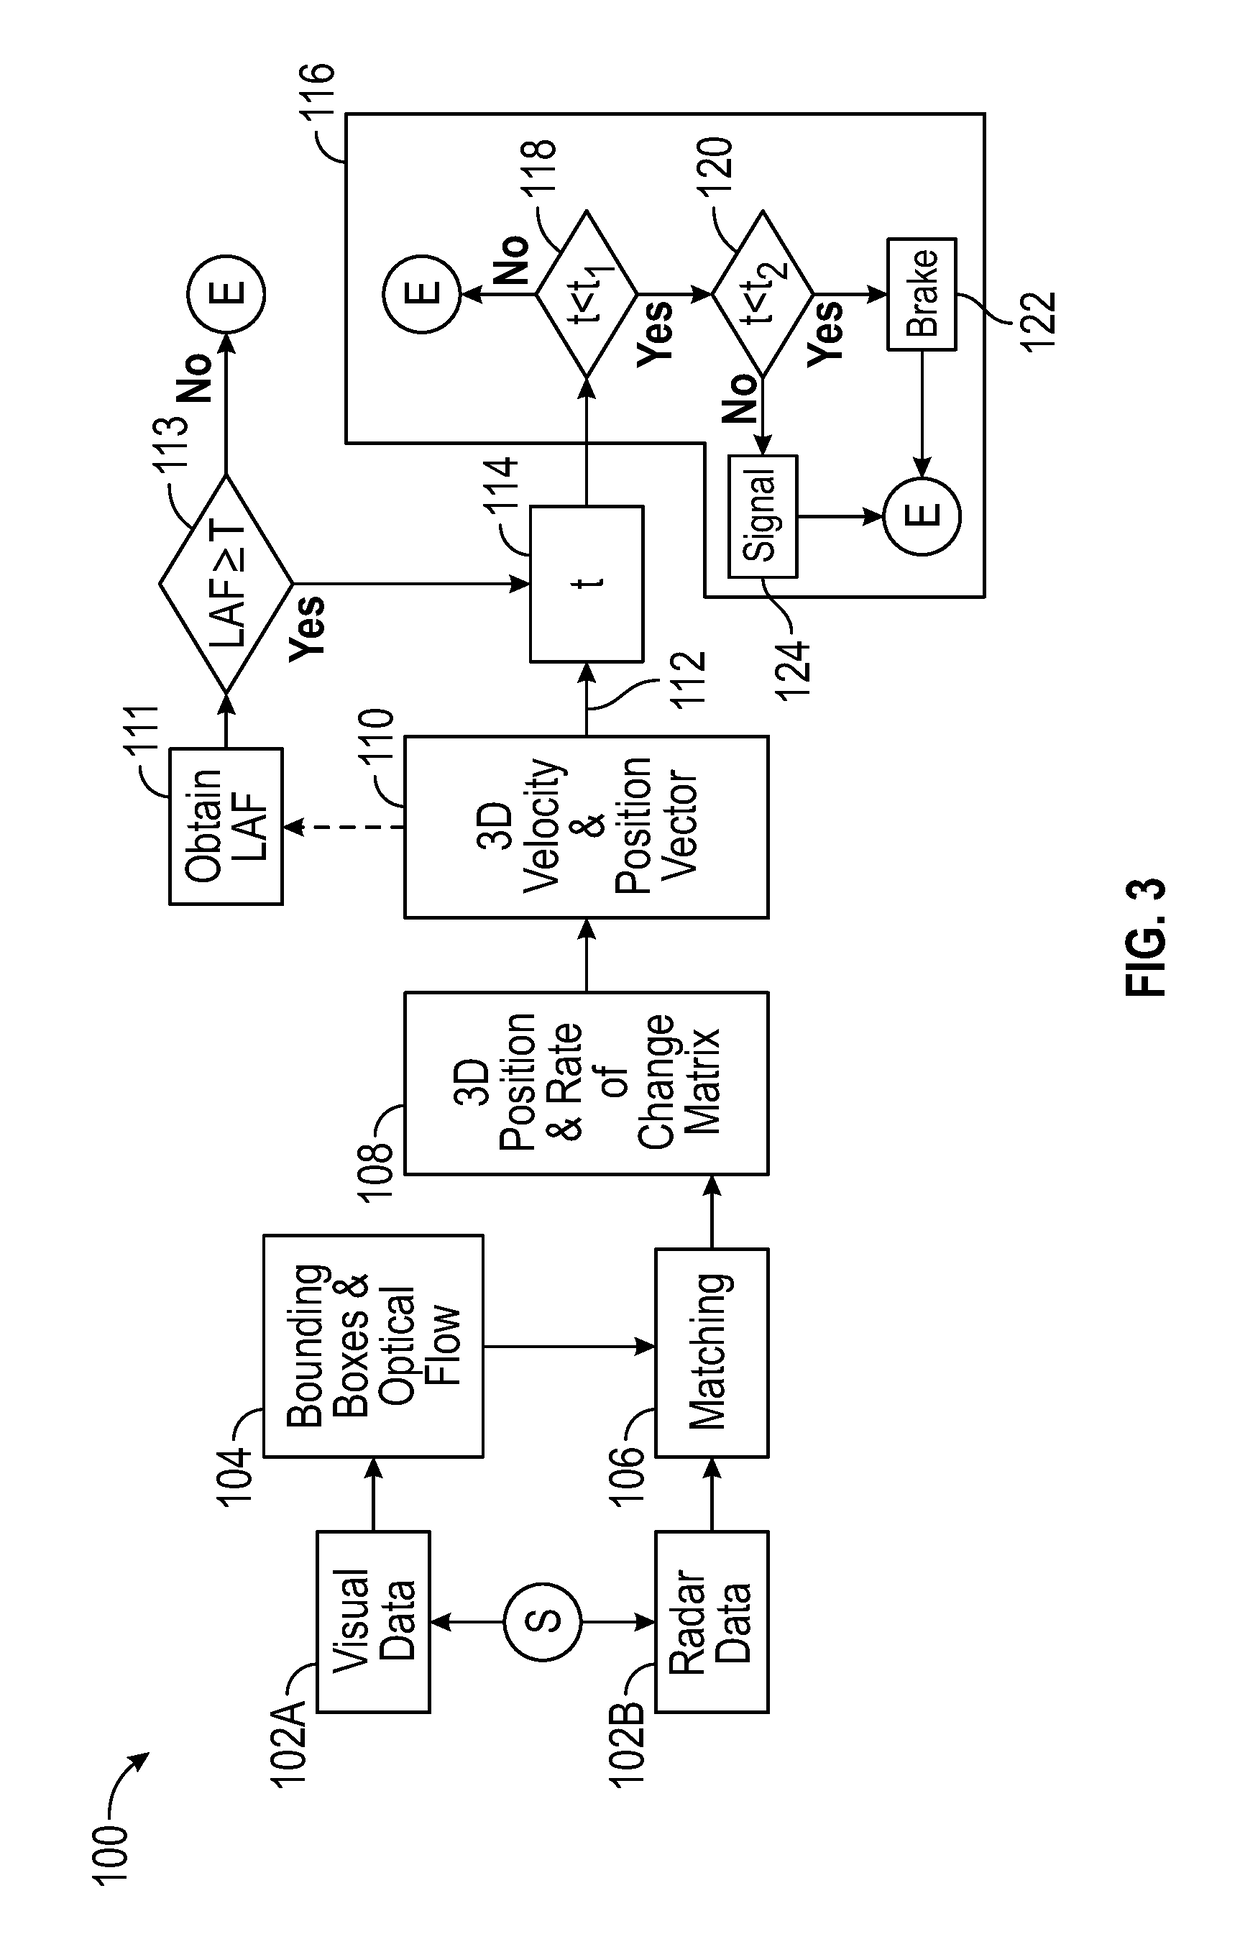 Control of host device using three-dimensional position and velocity